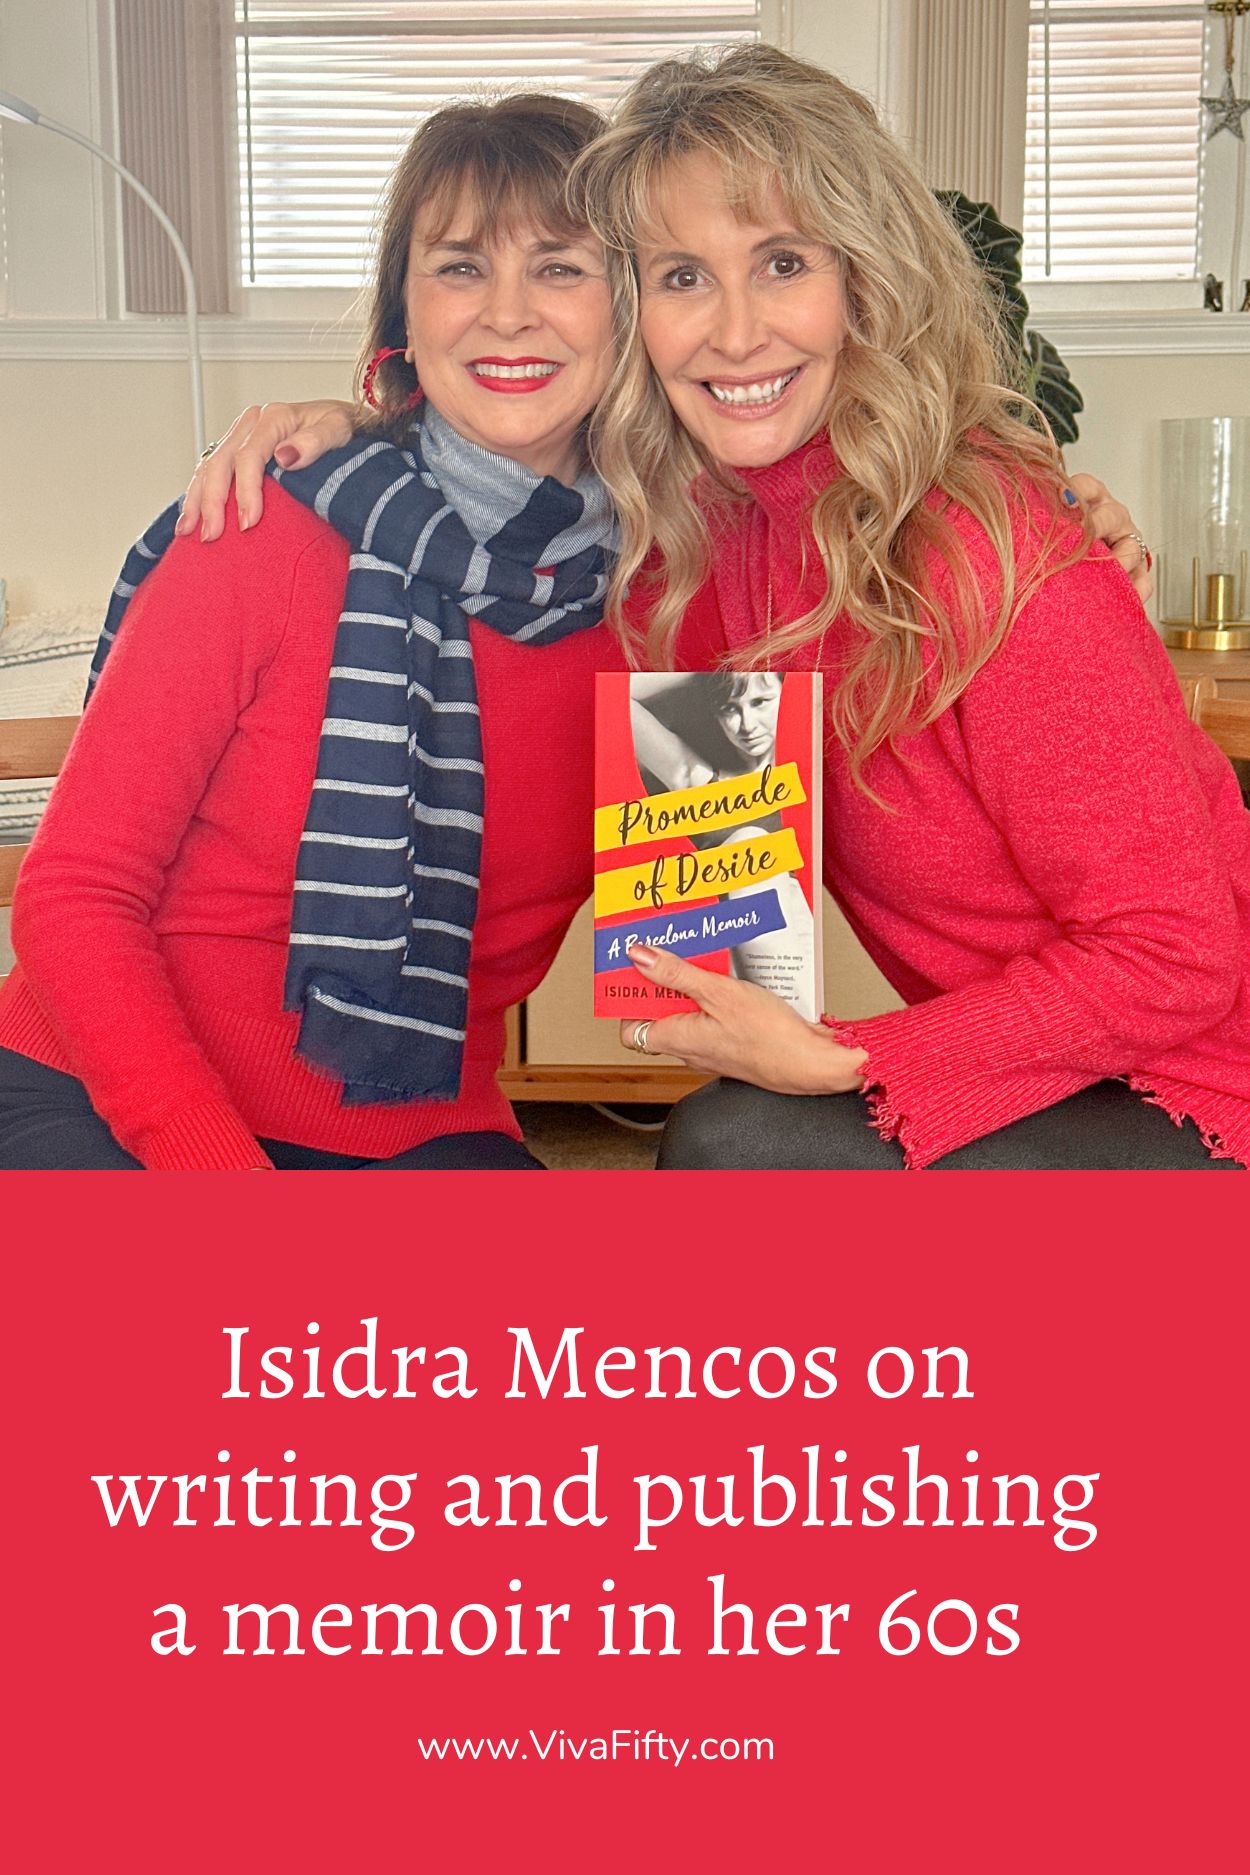 After a lifetime of writing in the shadows, Isidra Mencos took a leap of faith and quit her plum job to write and publish her memoir.